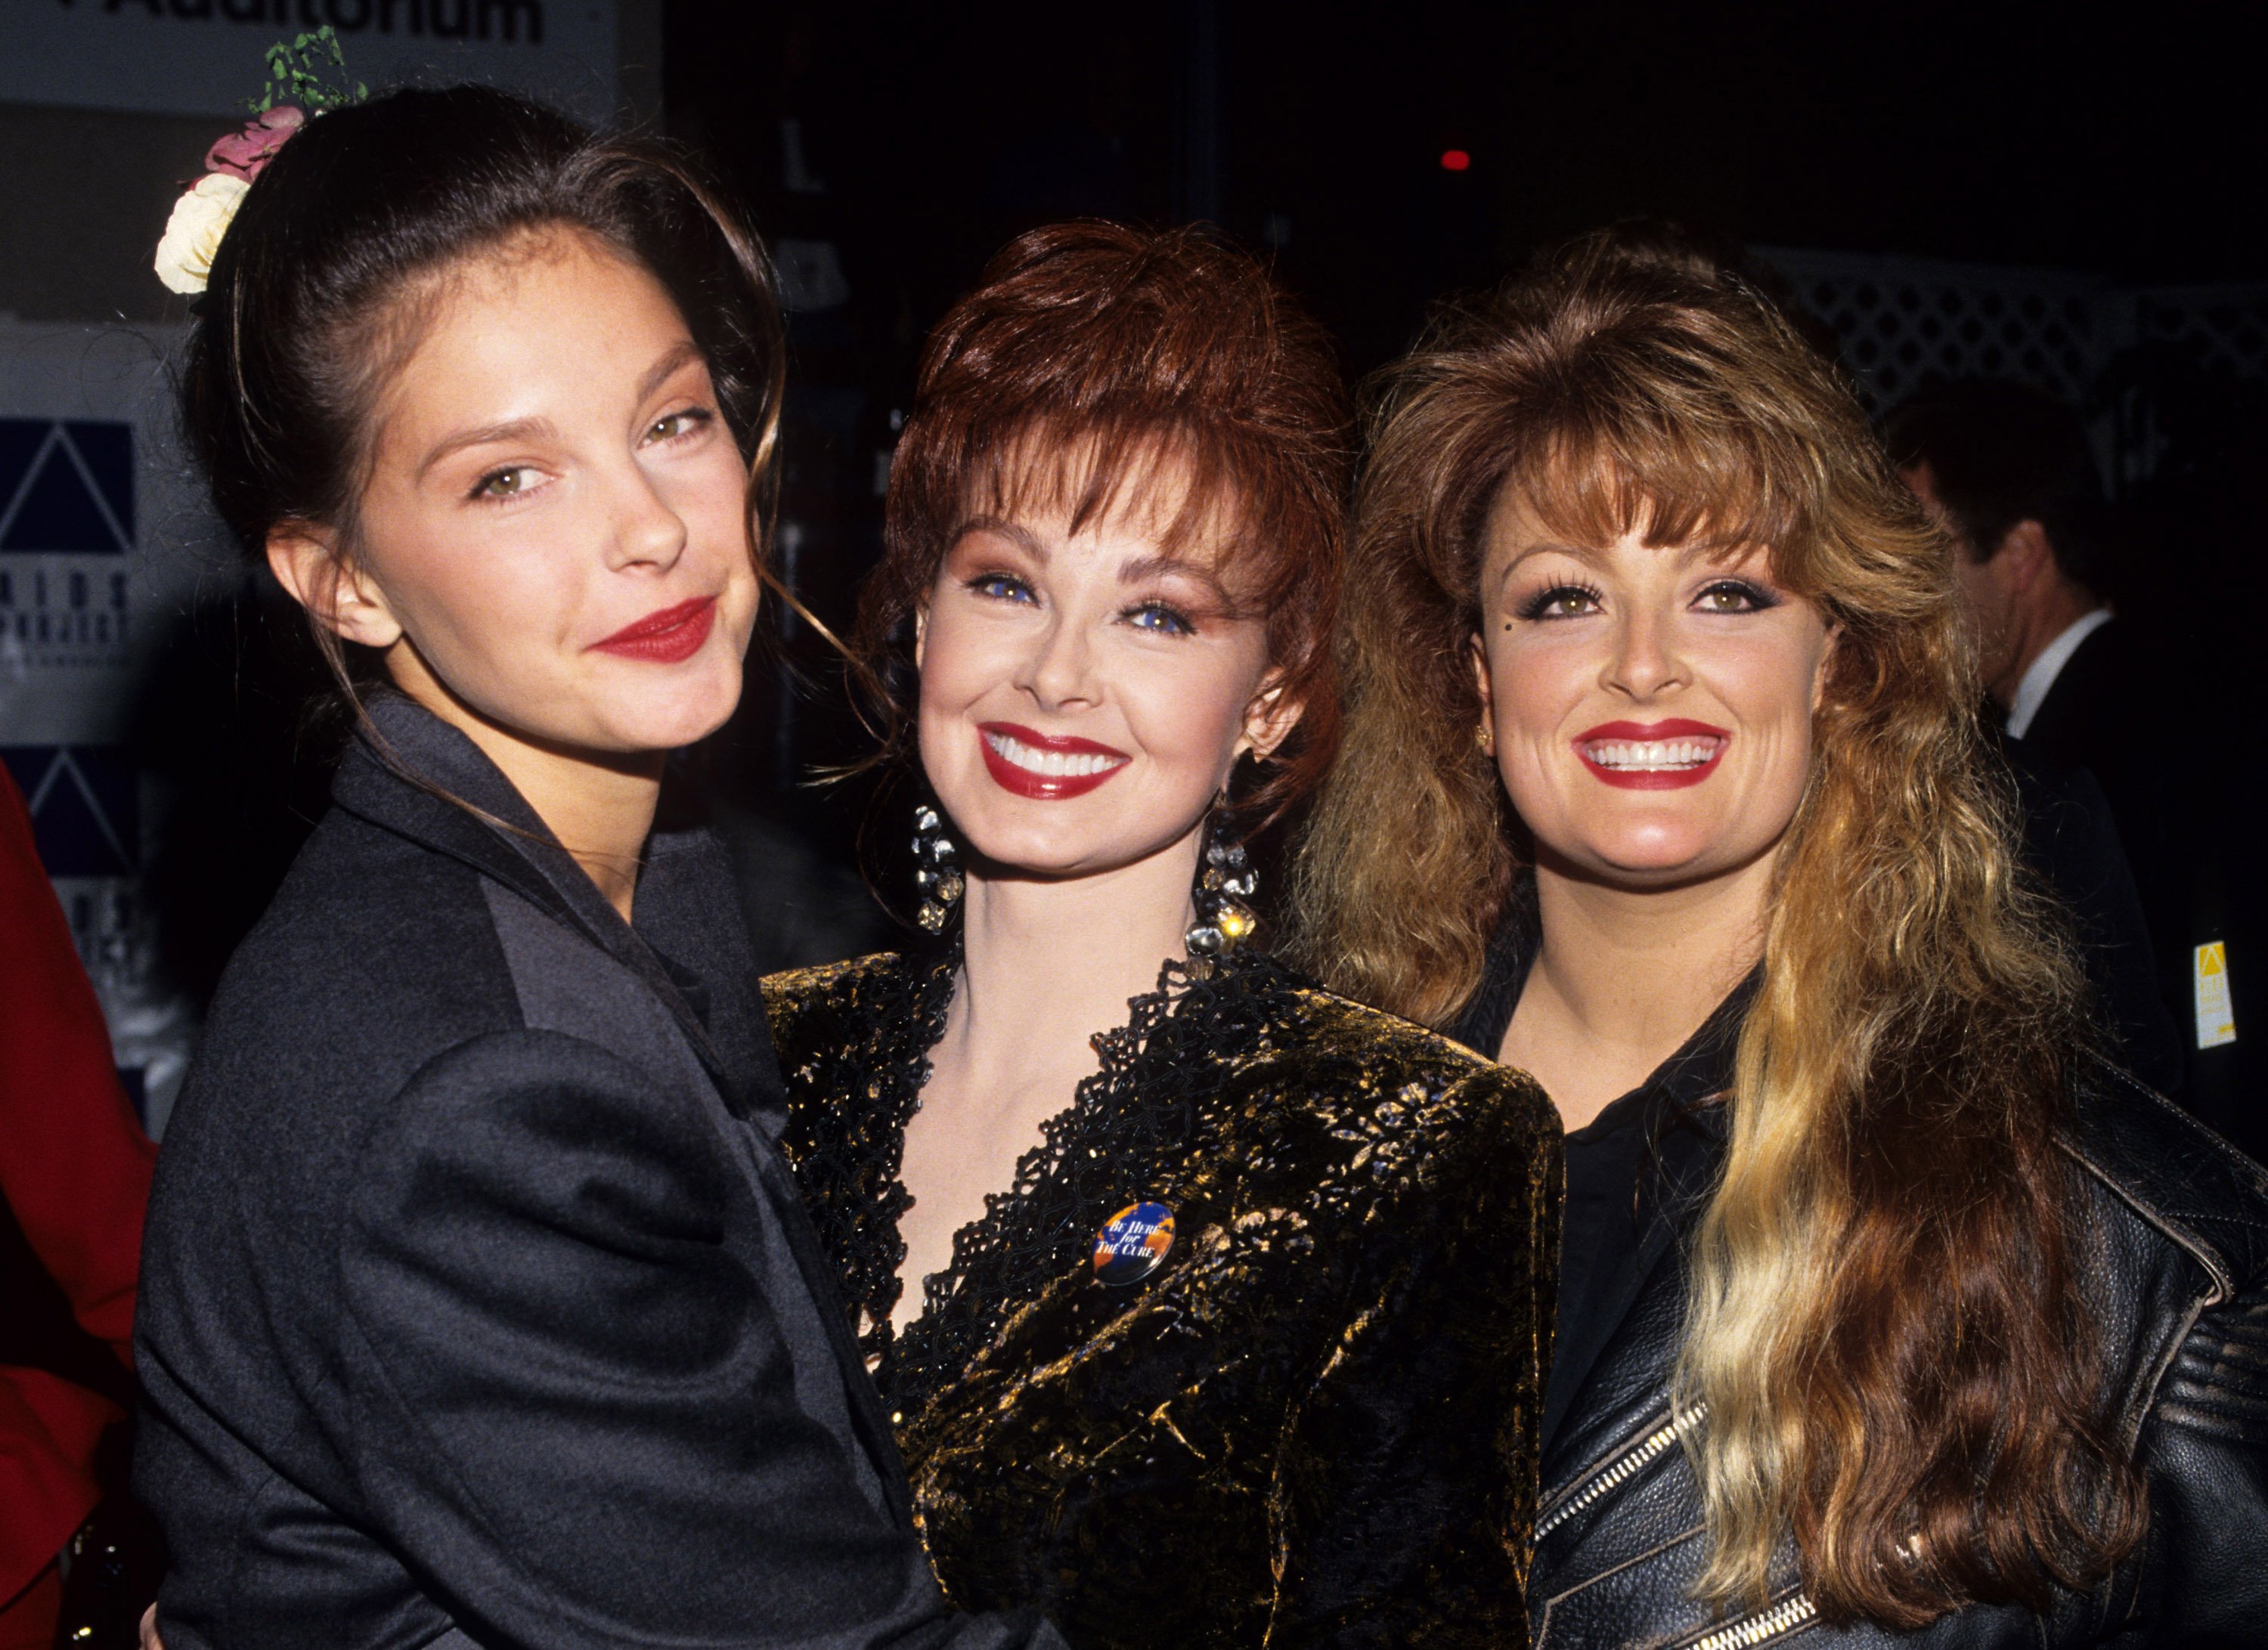 Ashley Judd, Naomi Judd, and Wynonna Judd during APLA 6th Commitment to Life Concert Benefit at Universal Amphitheater in Universal City, California, United States. | Source: Getty Images